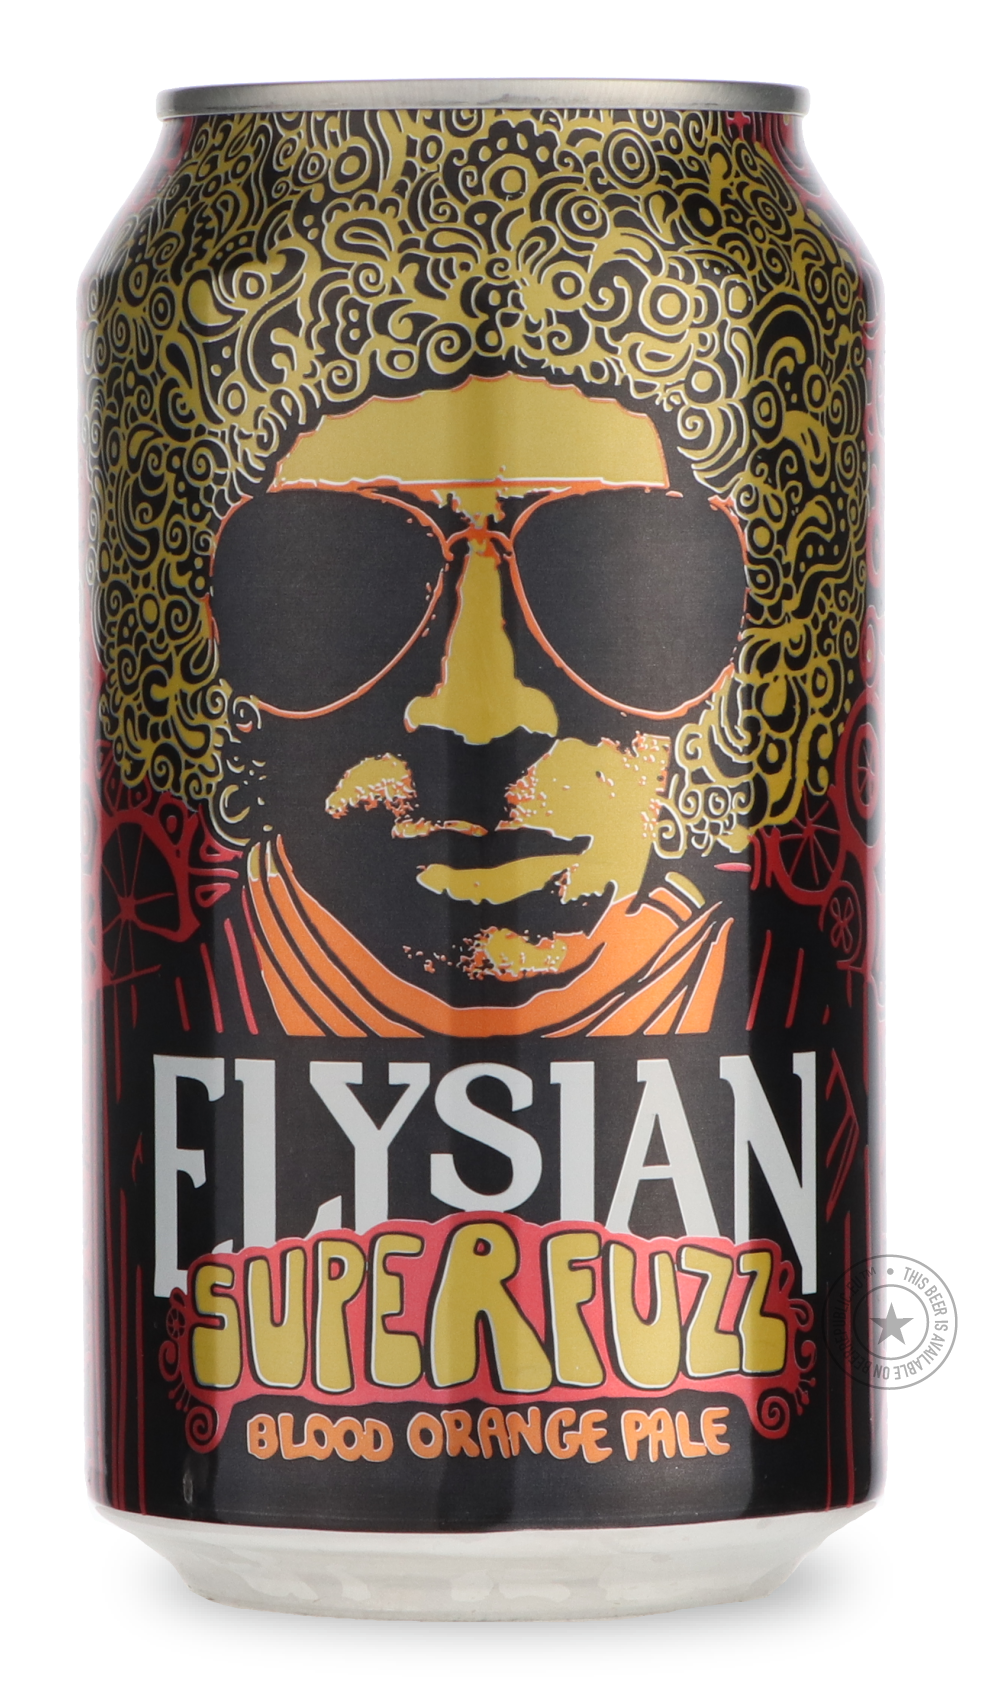 -Elysian- Superfuzz-Pale- Only @ Beer Republic - The best online beer store for American & Canadian craft beer - Buy beer online from the USA and Canada - Bier online kopen - Amerikaans bier kopen - Craft beer store - Craft beer kopen - Amerikanisch bier kaufen - Bier online kaufen - Acheter biere online - IPA - Stout - Porter - New England IPA - Hazy IPA - Imperial Stout - Barrel Aged - Barrel Aged Imperial Stout - Brown - Dark beer - Blond - Blonde - Pilsner - Lager - Wheat - Weizen - Amber - Barley Wine 